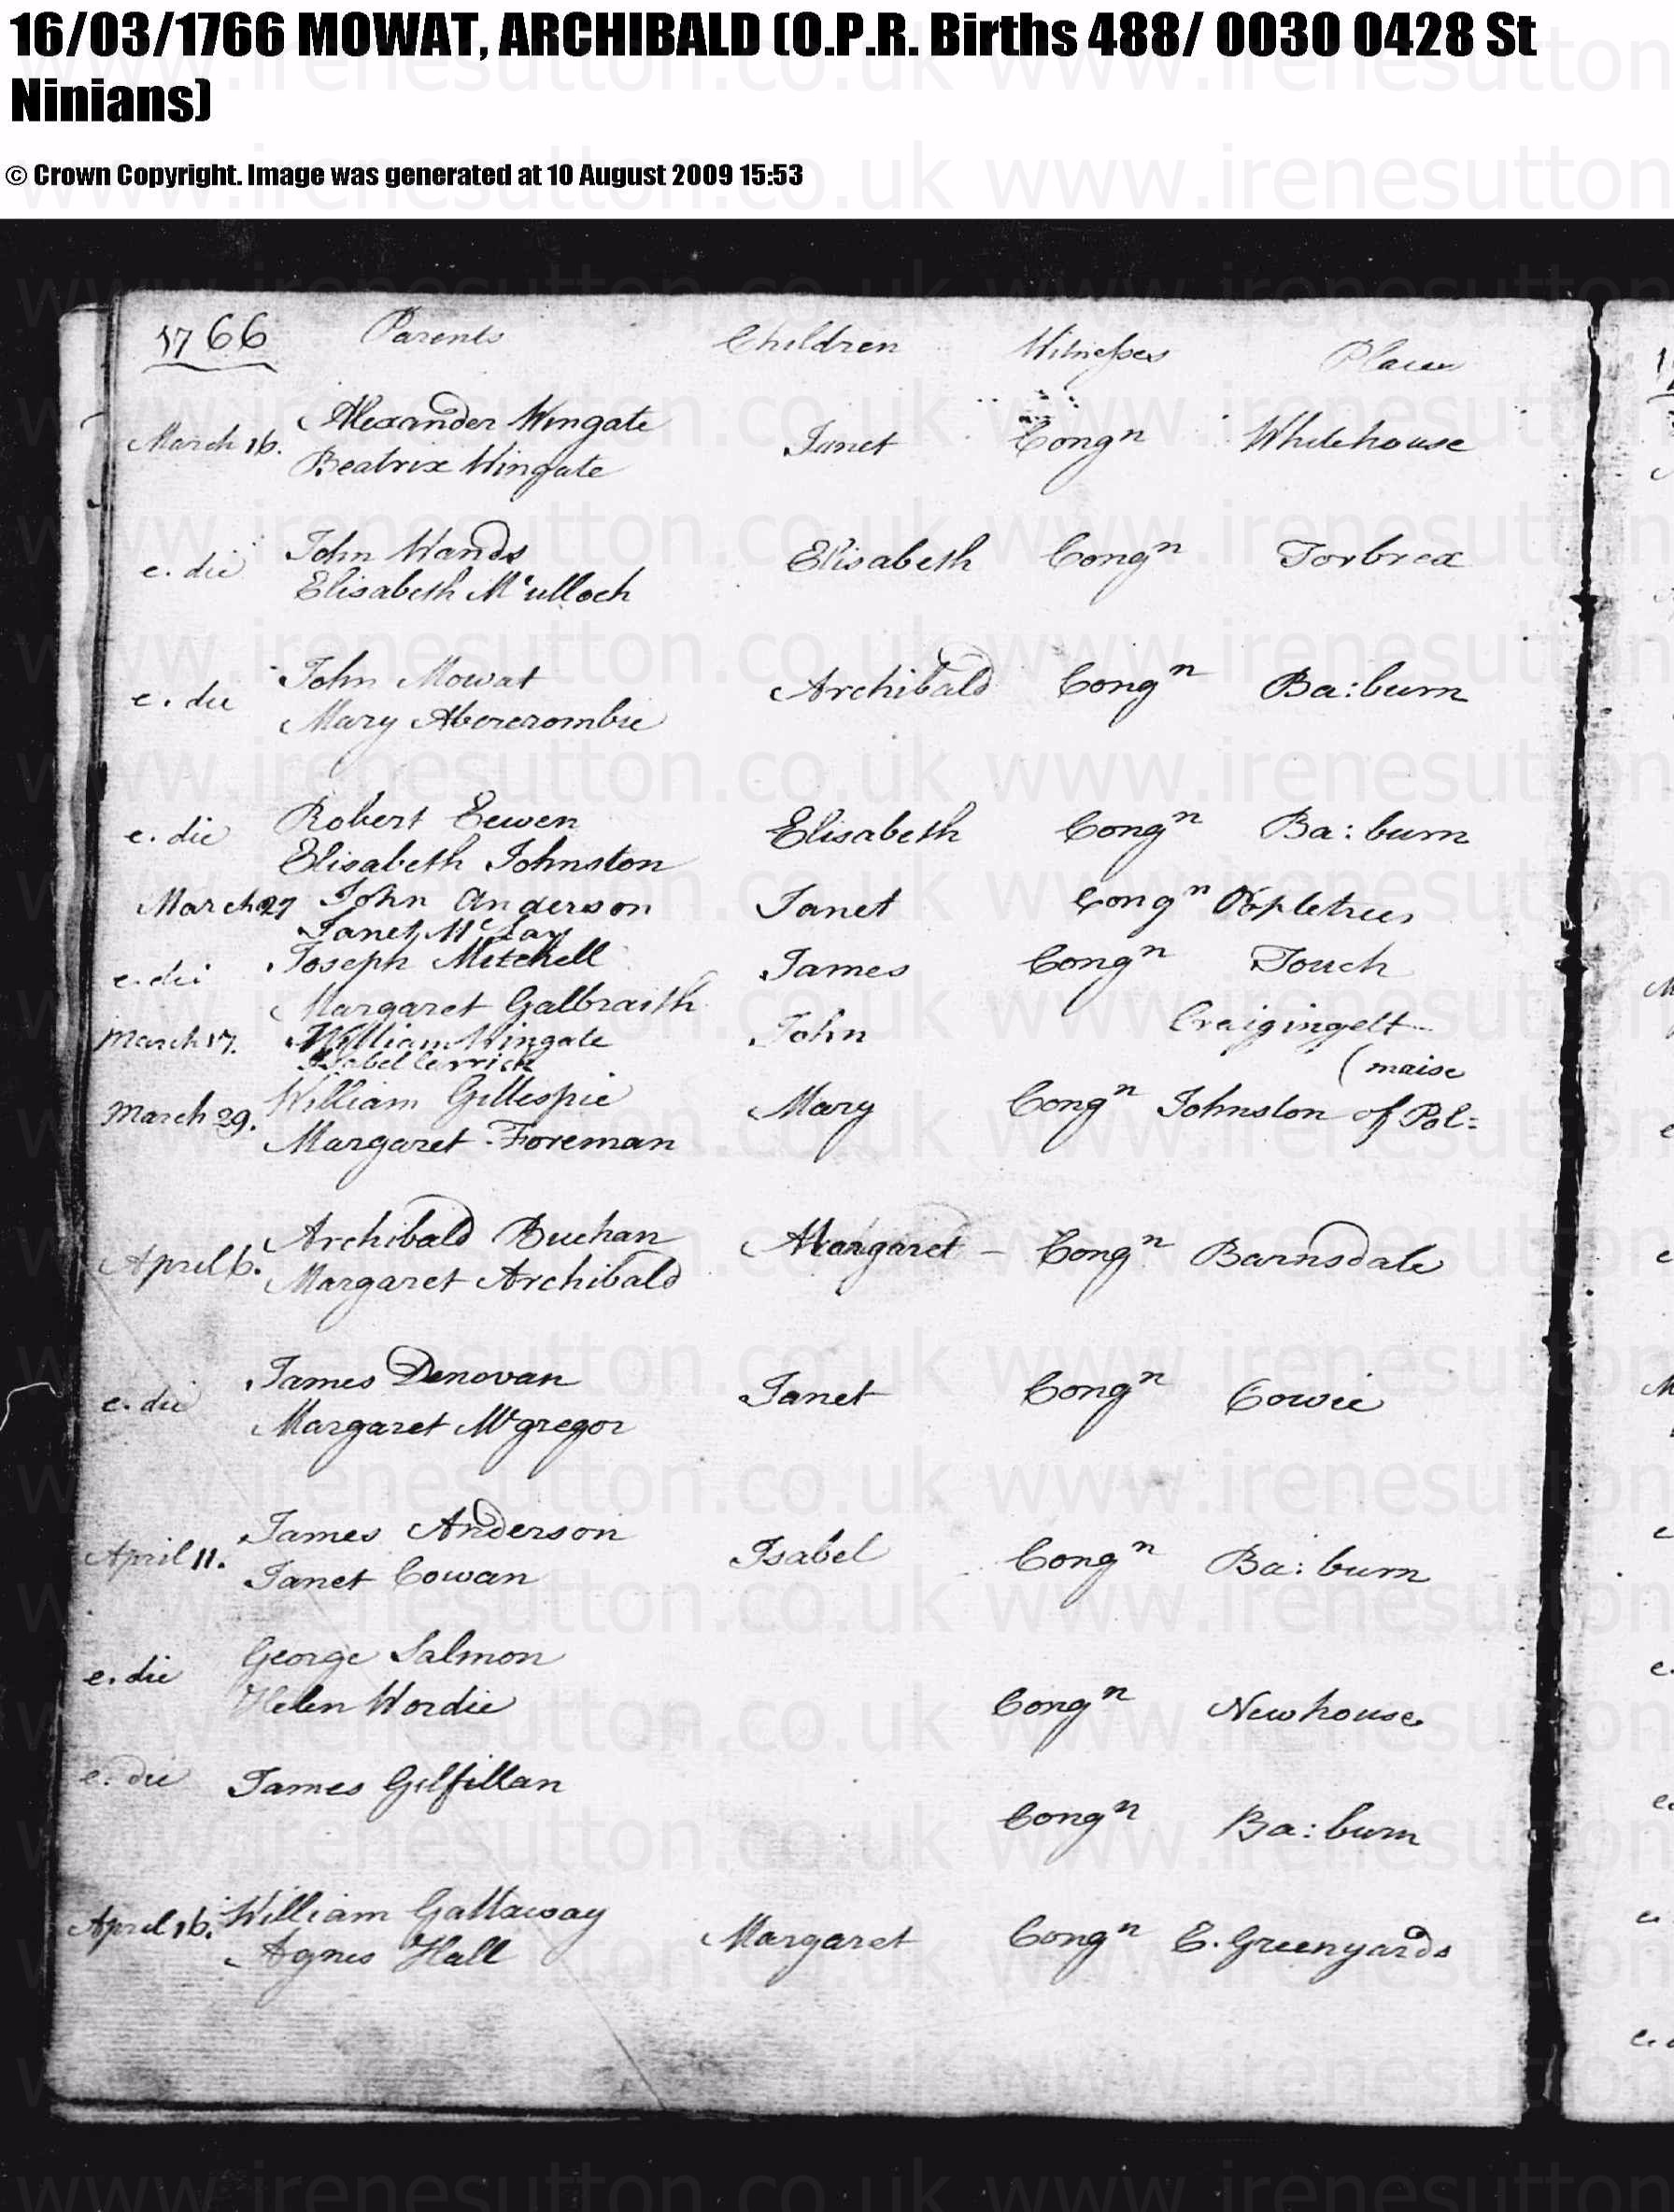  sourced from Old Parochial Register Birth 488/0030 0428 St Ninians.